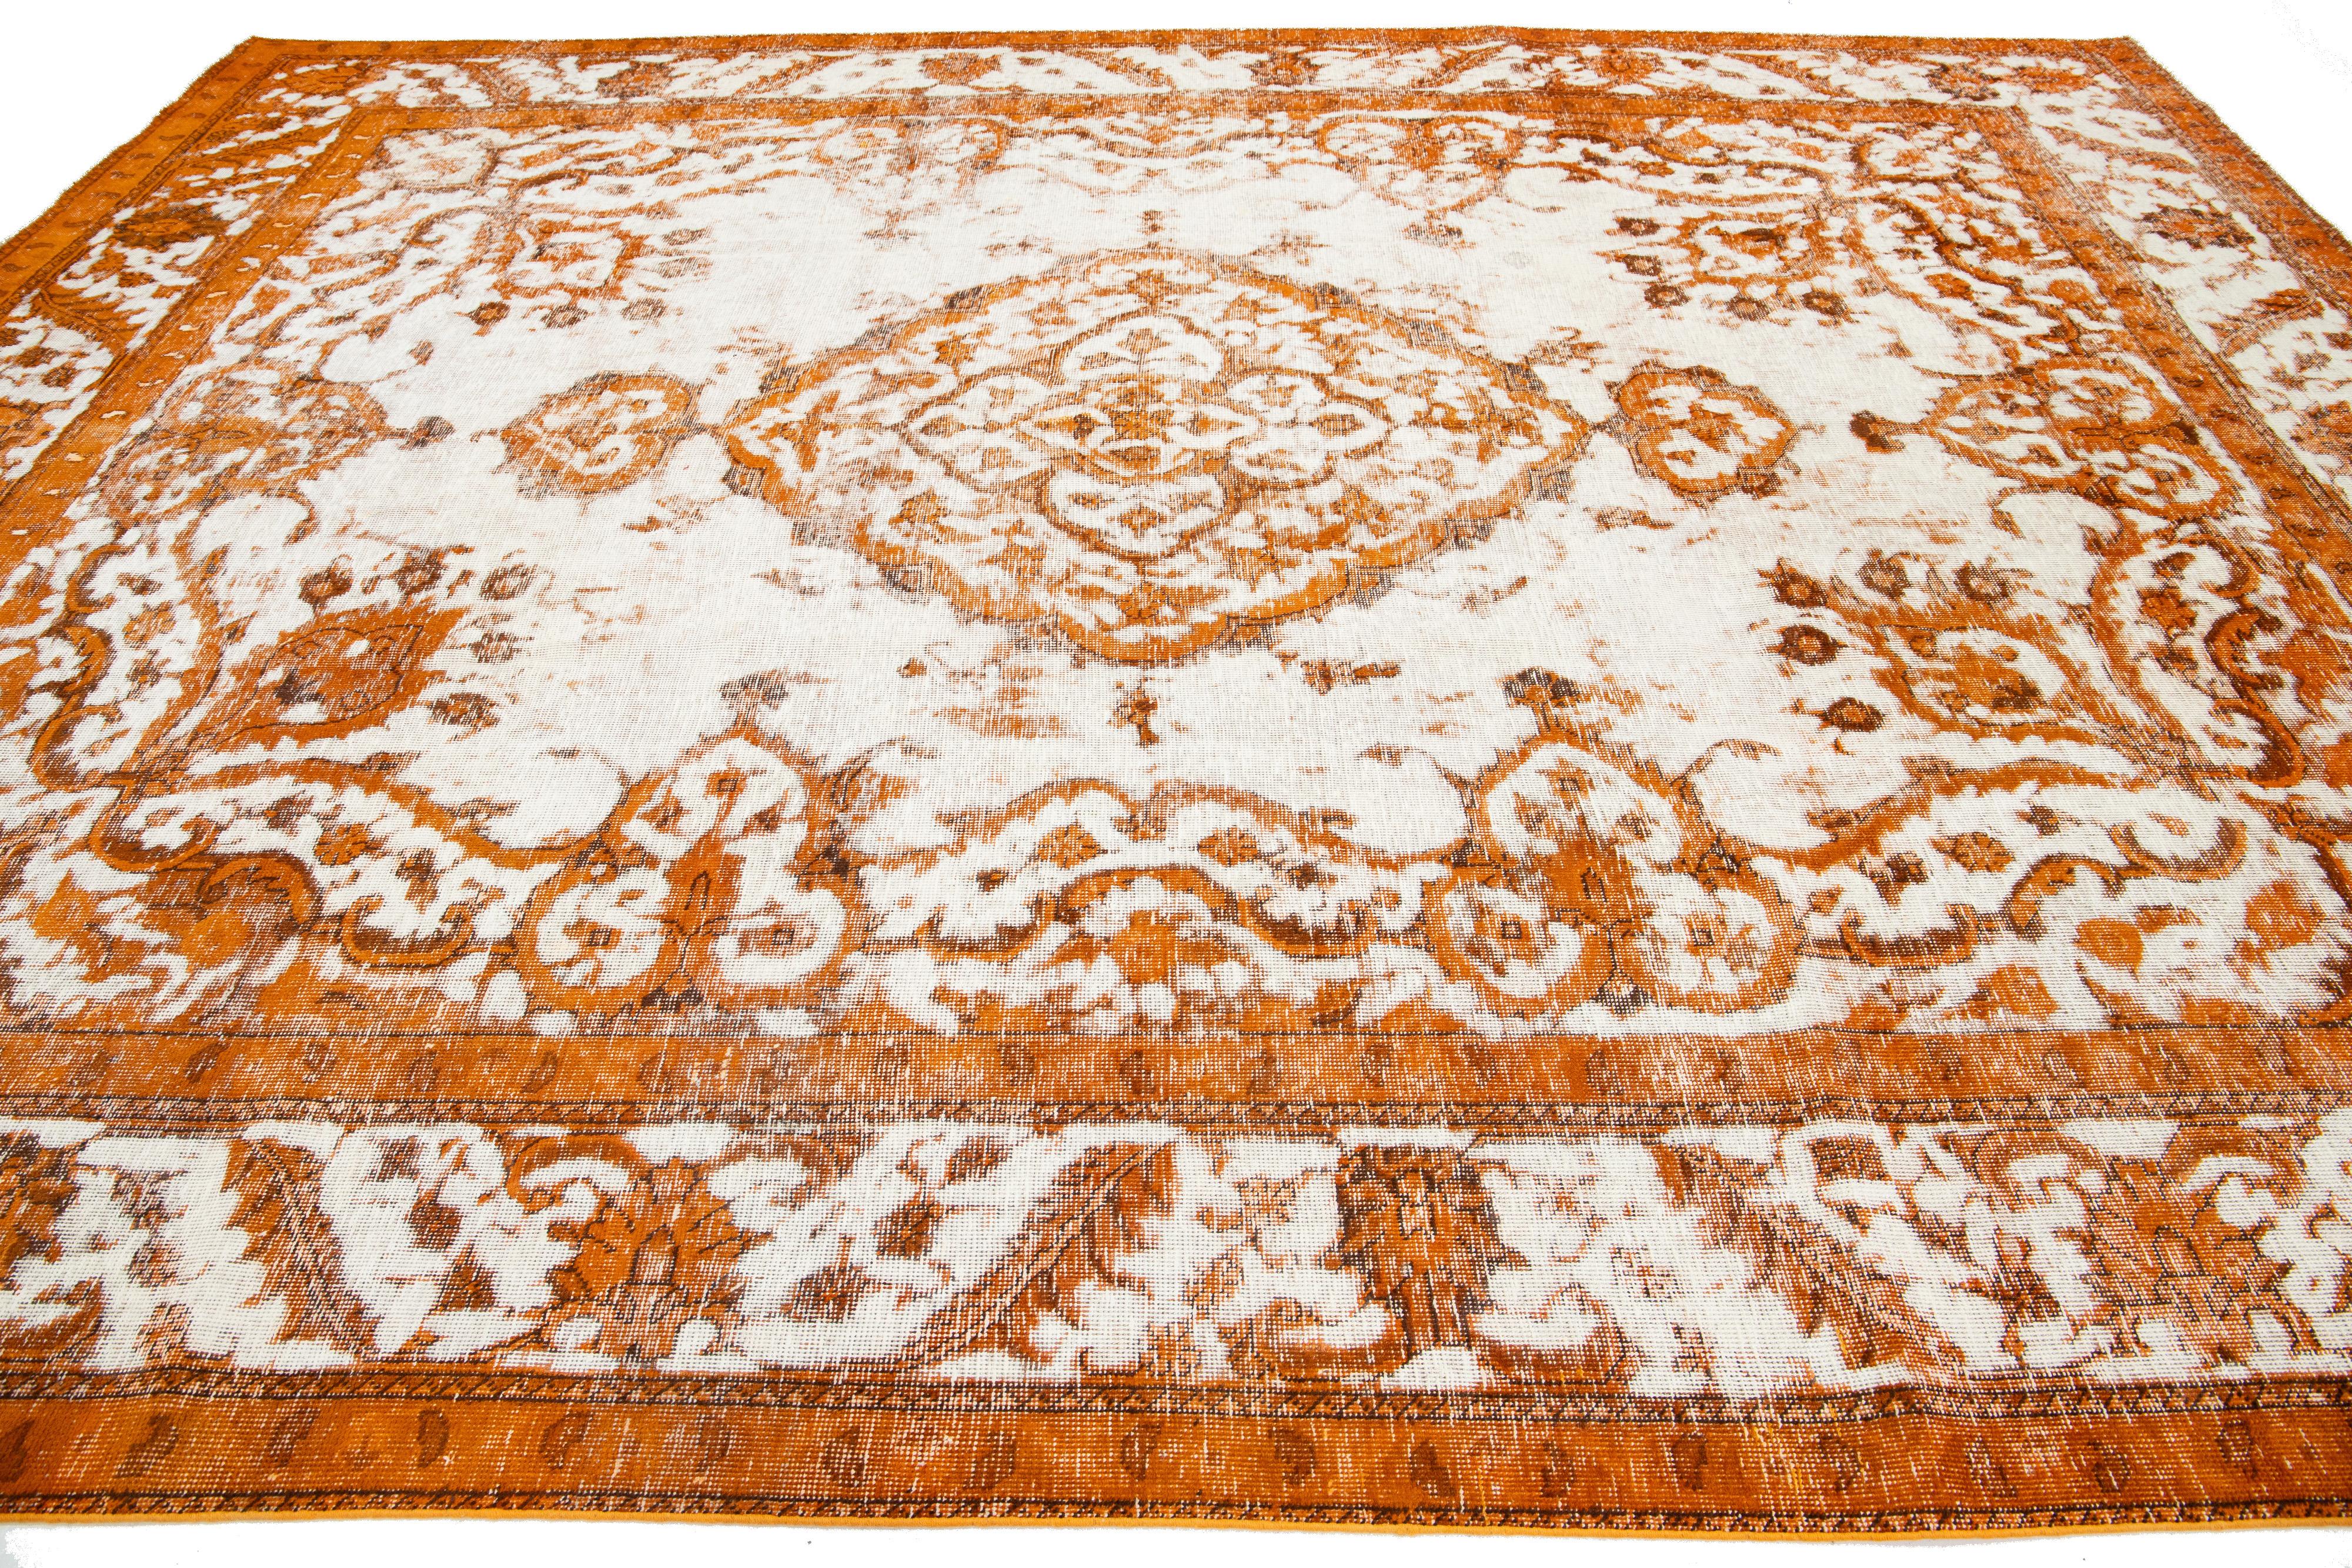  Overdyed Antique Orange Wool Rug With Medallion Motif For Sale 4